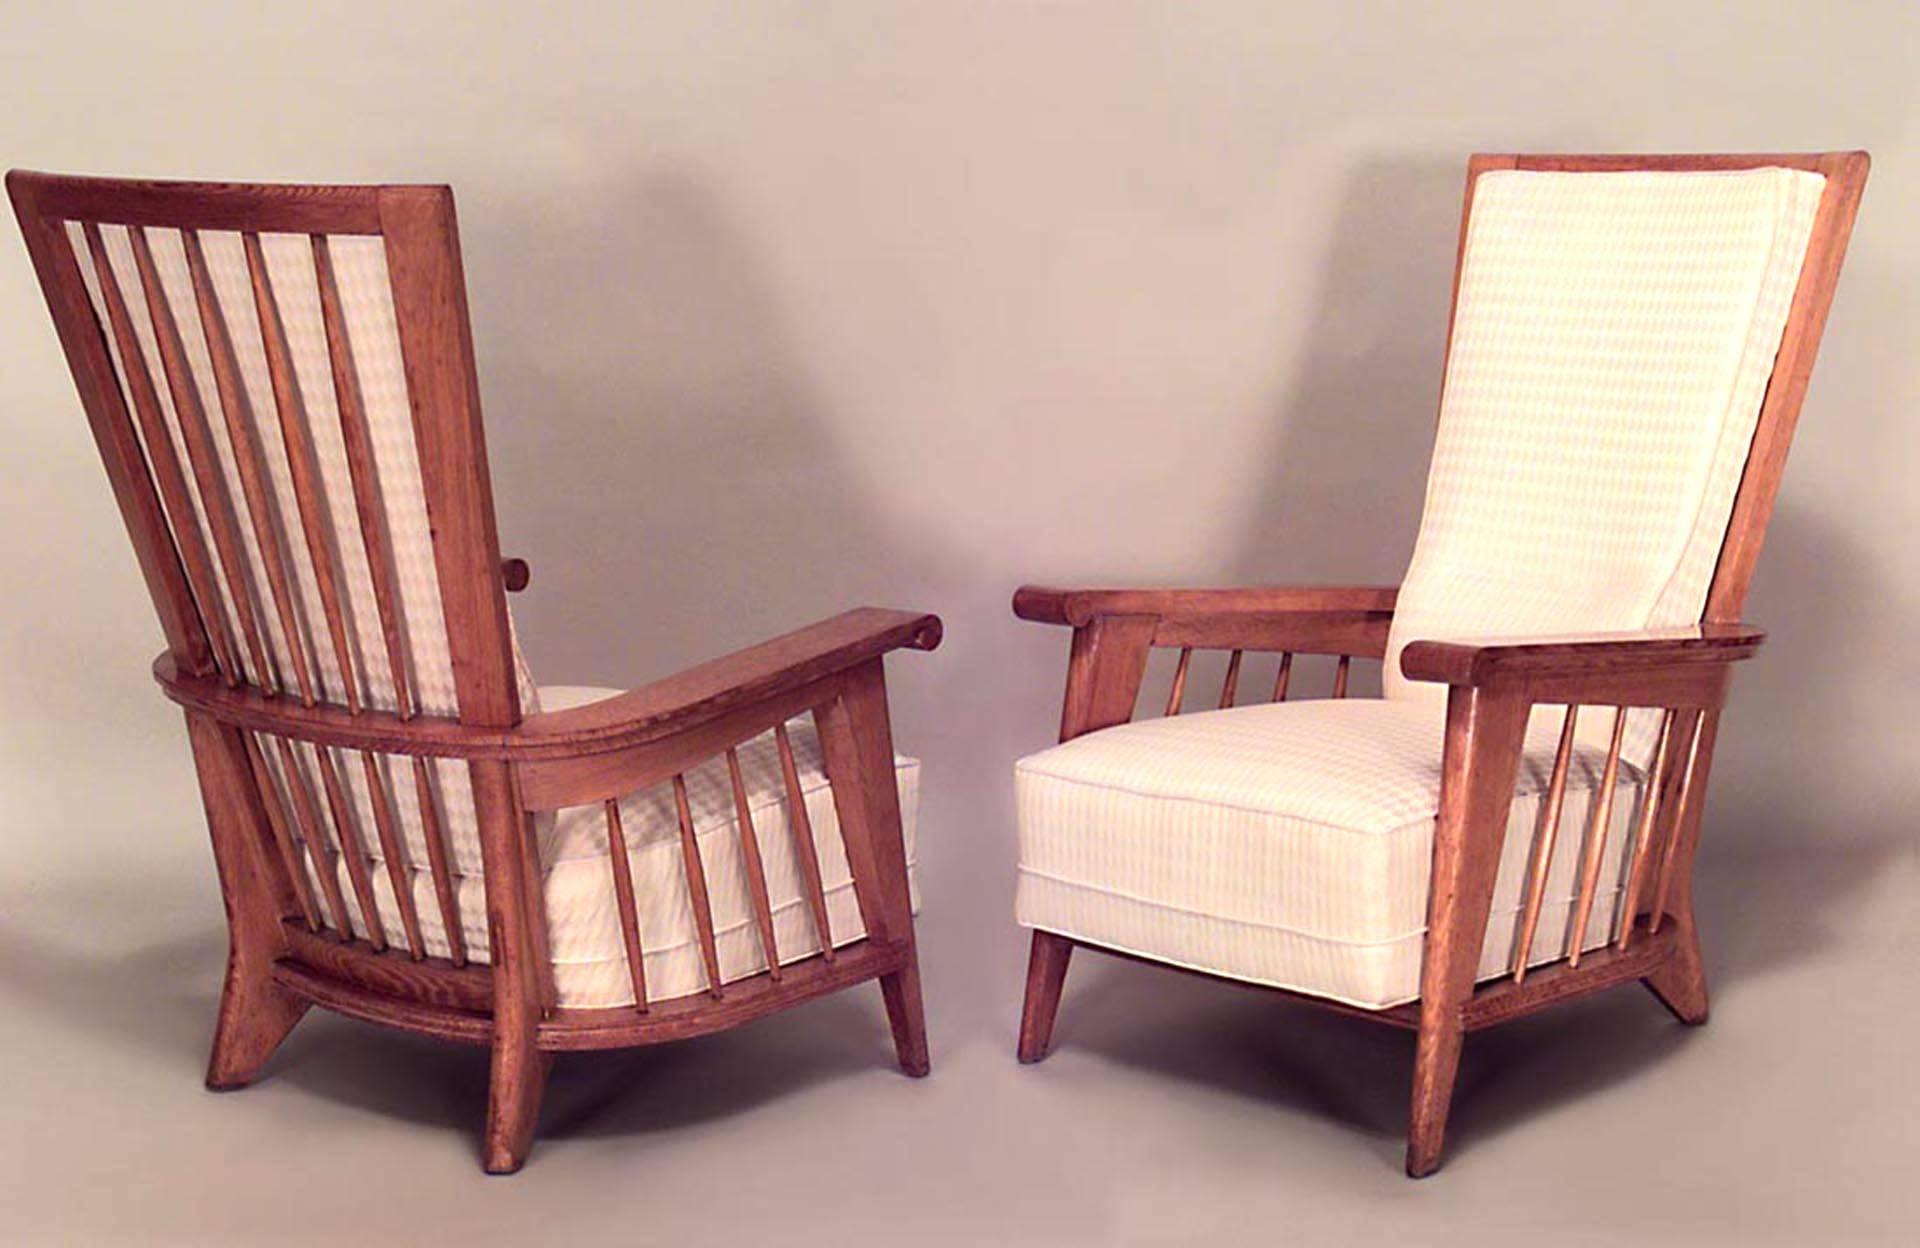 Pair of French Mid-Century (1940s) oak high back Armchairs with open spindle design sides and upholstered seat and back (Attributed to JACQUES ADNET) (PRICED AS Pair)
